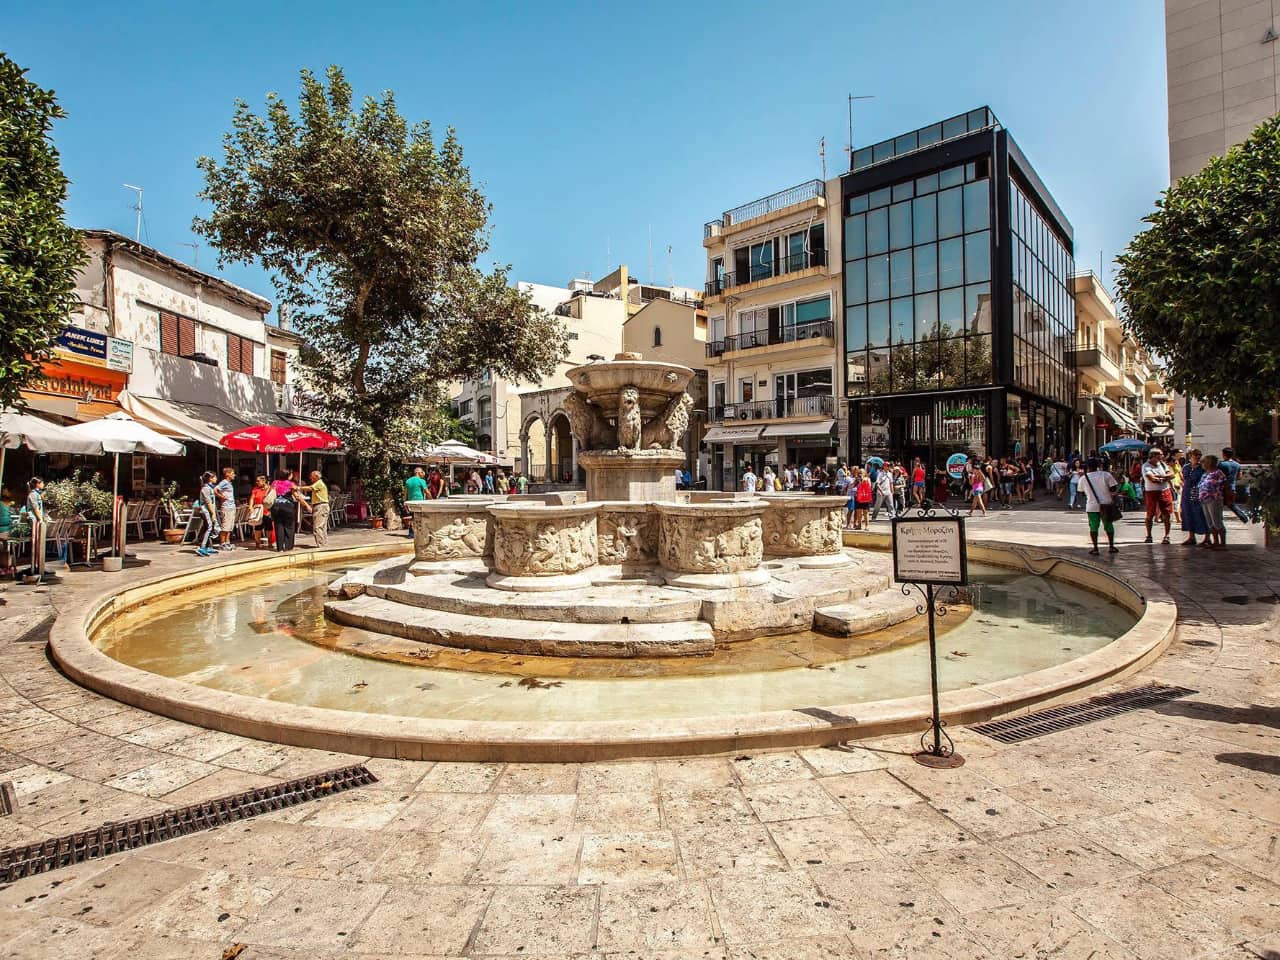 A Tour of the City of Heraklion crete, cultural tour iraklion crete, heraklion crete activiities, heraklion city tour self guided, best places to visit heraklion, what to do heraklion crete, koules fortress, morosini krini, st titos, st minas church, food tour heraklion